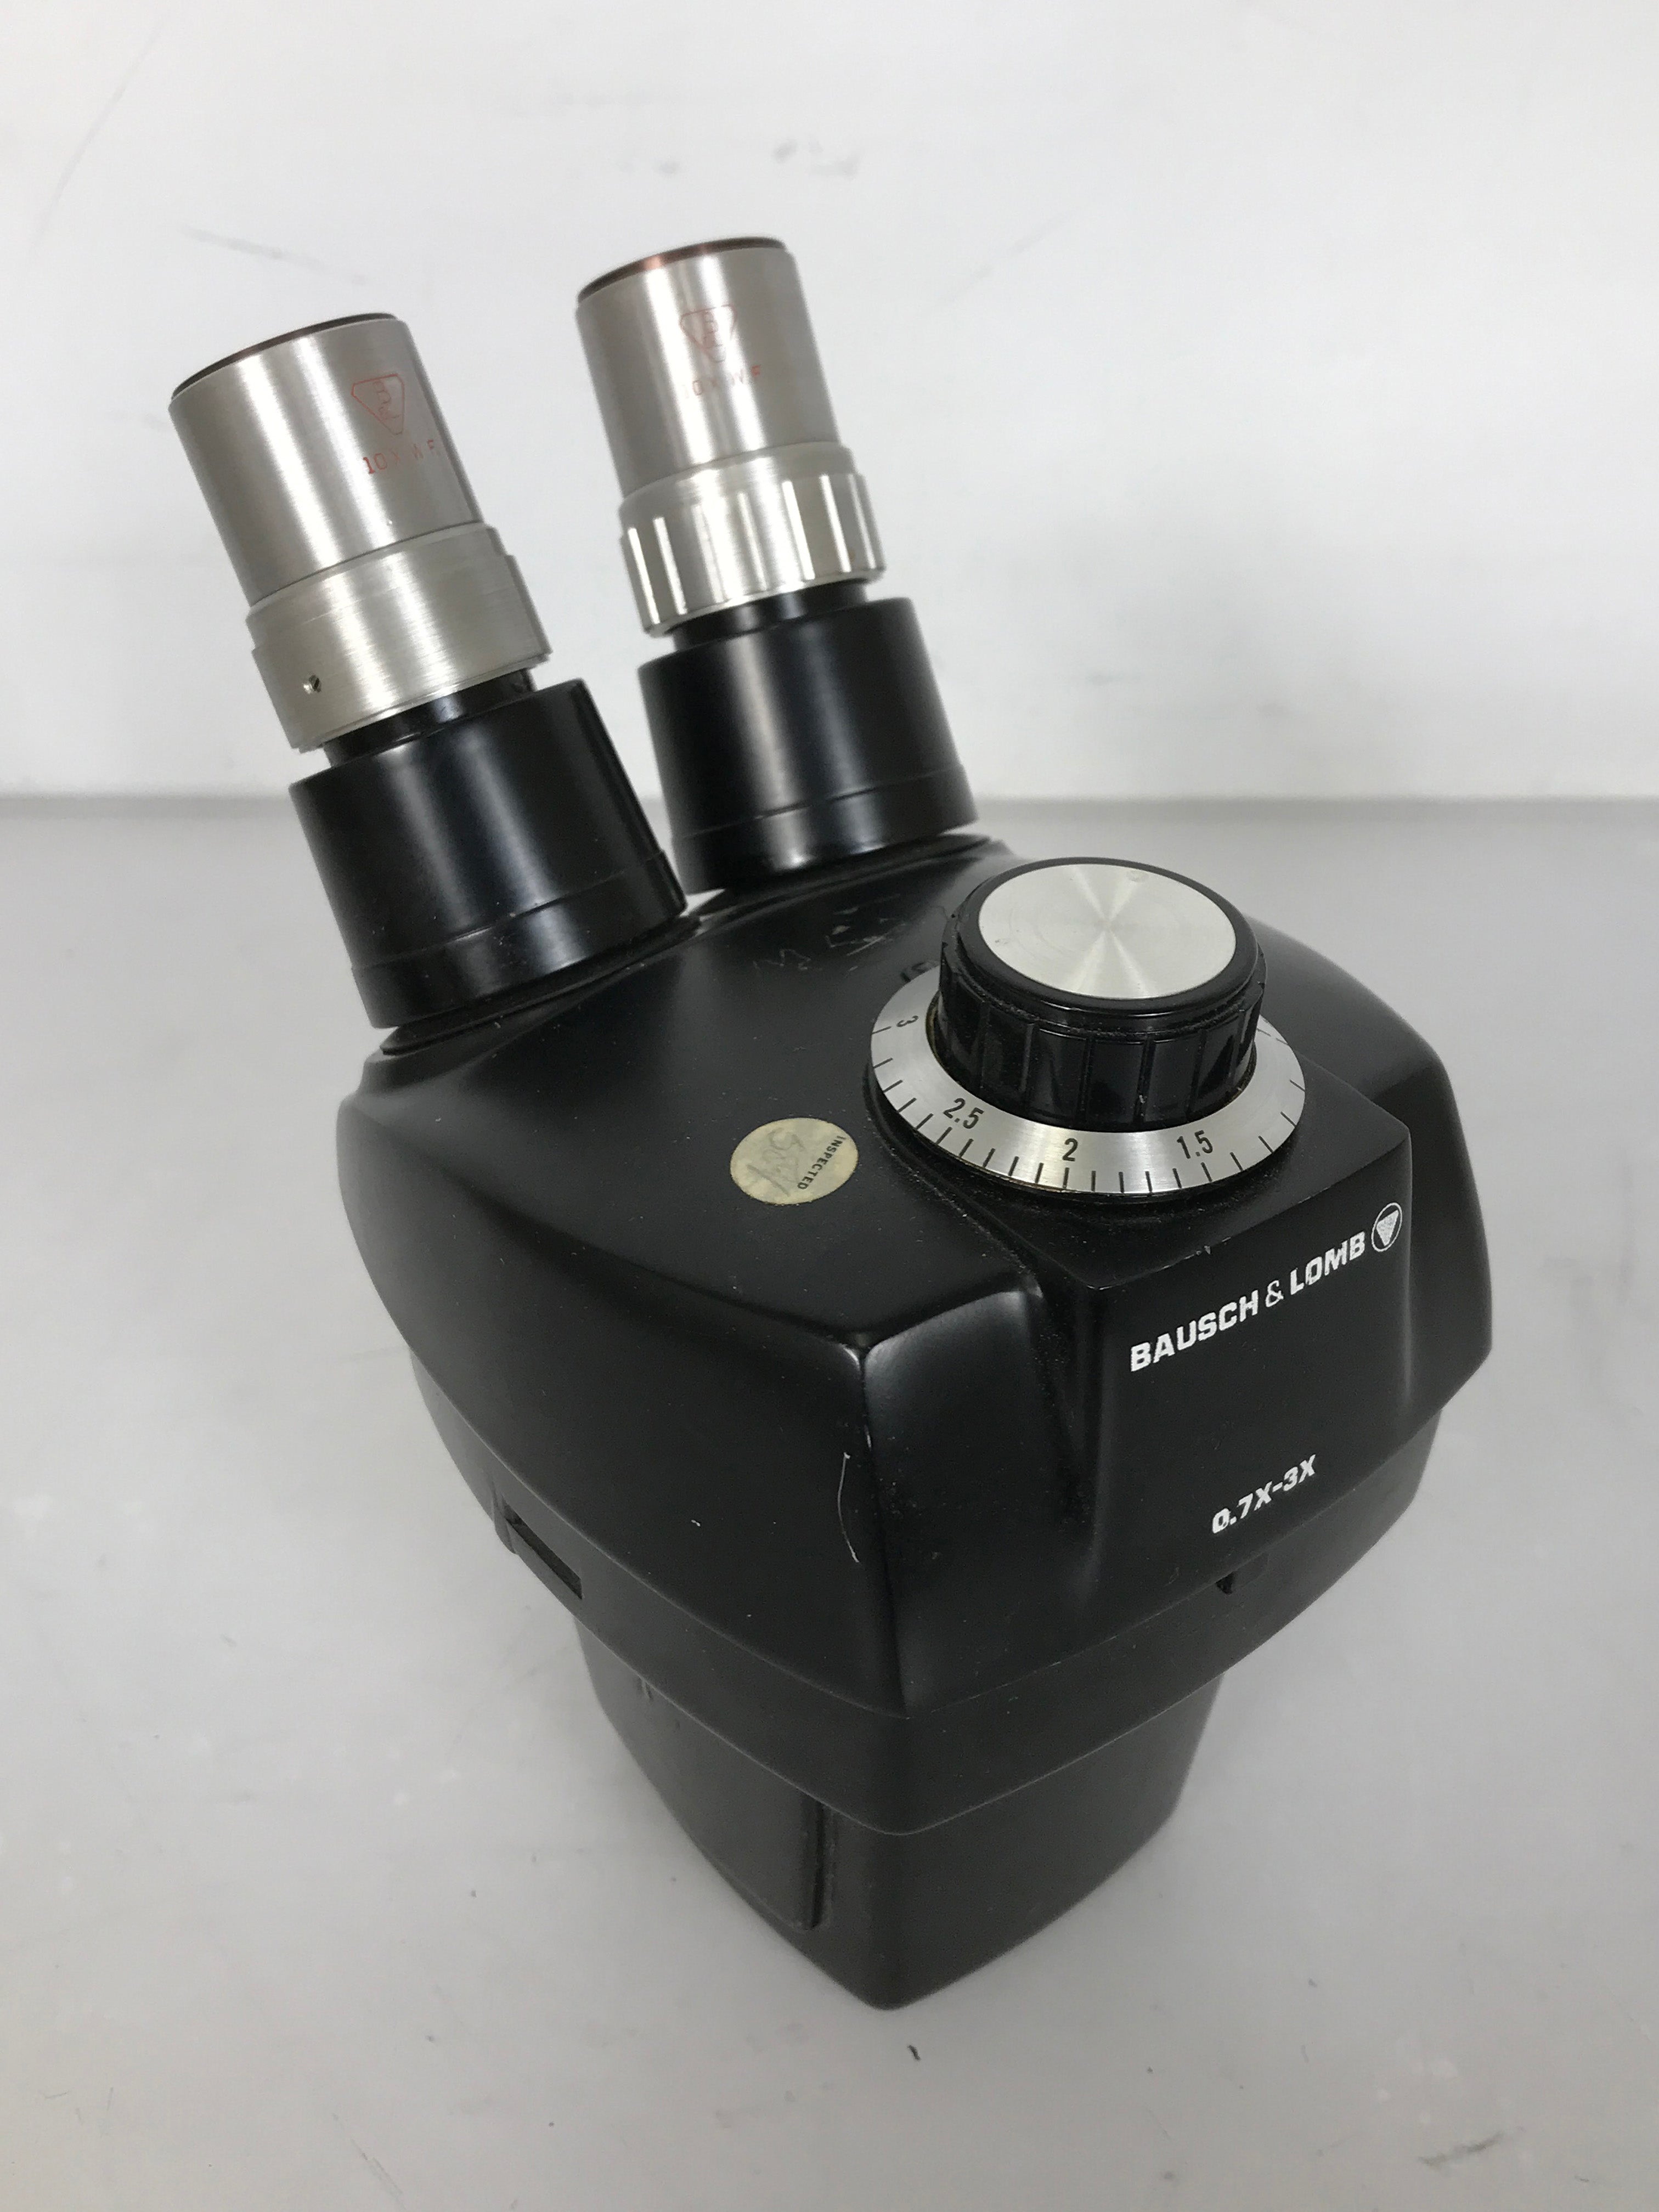 Bausch & Lomb Stereozoom 4 Microscope 0.7X-3X